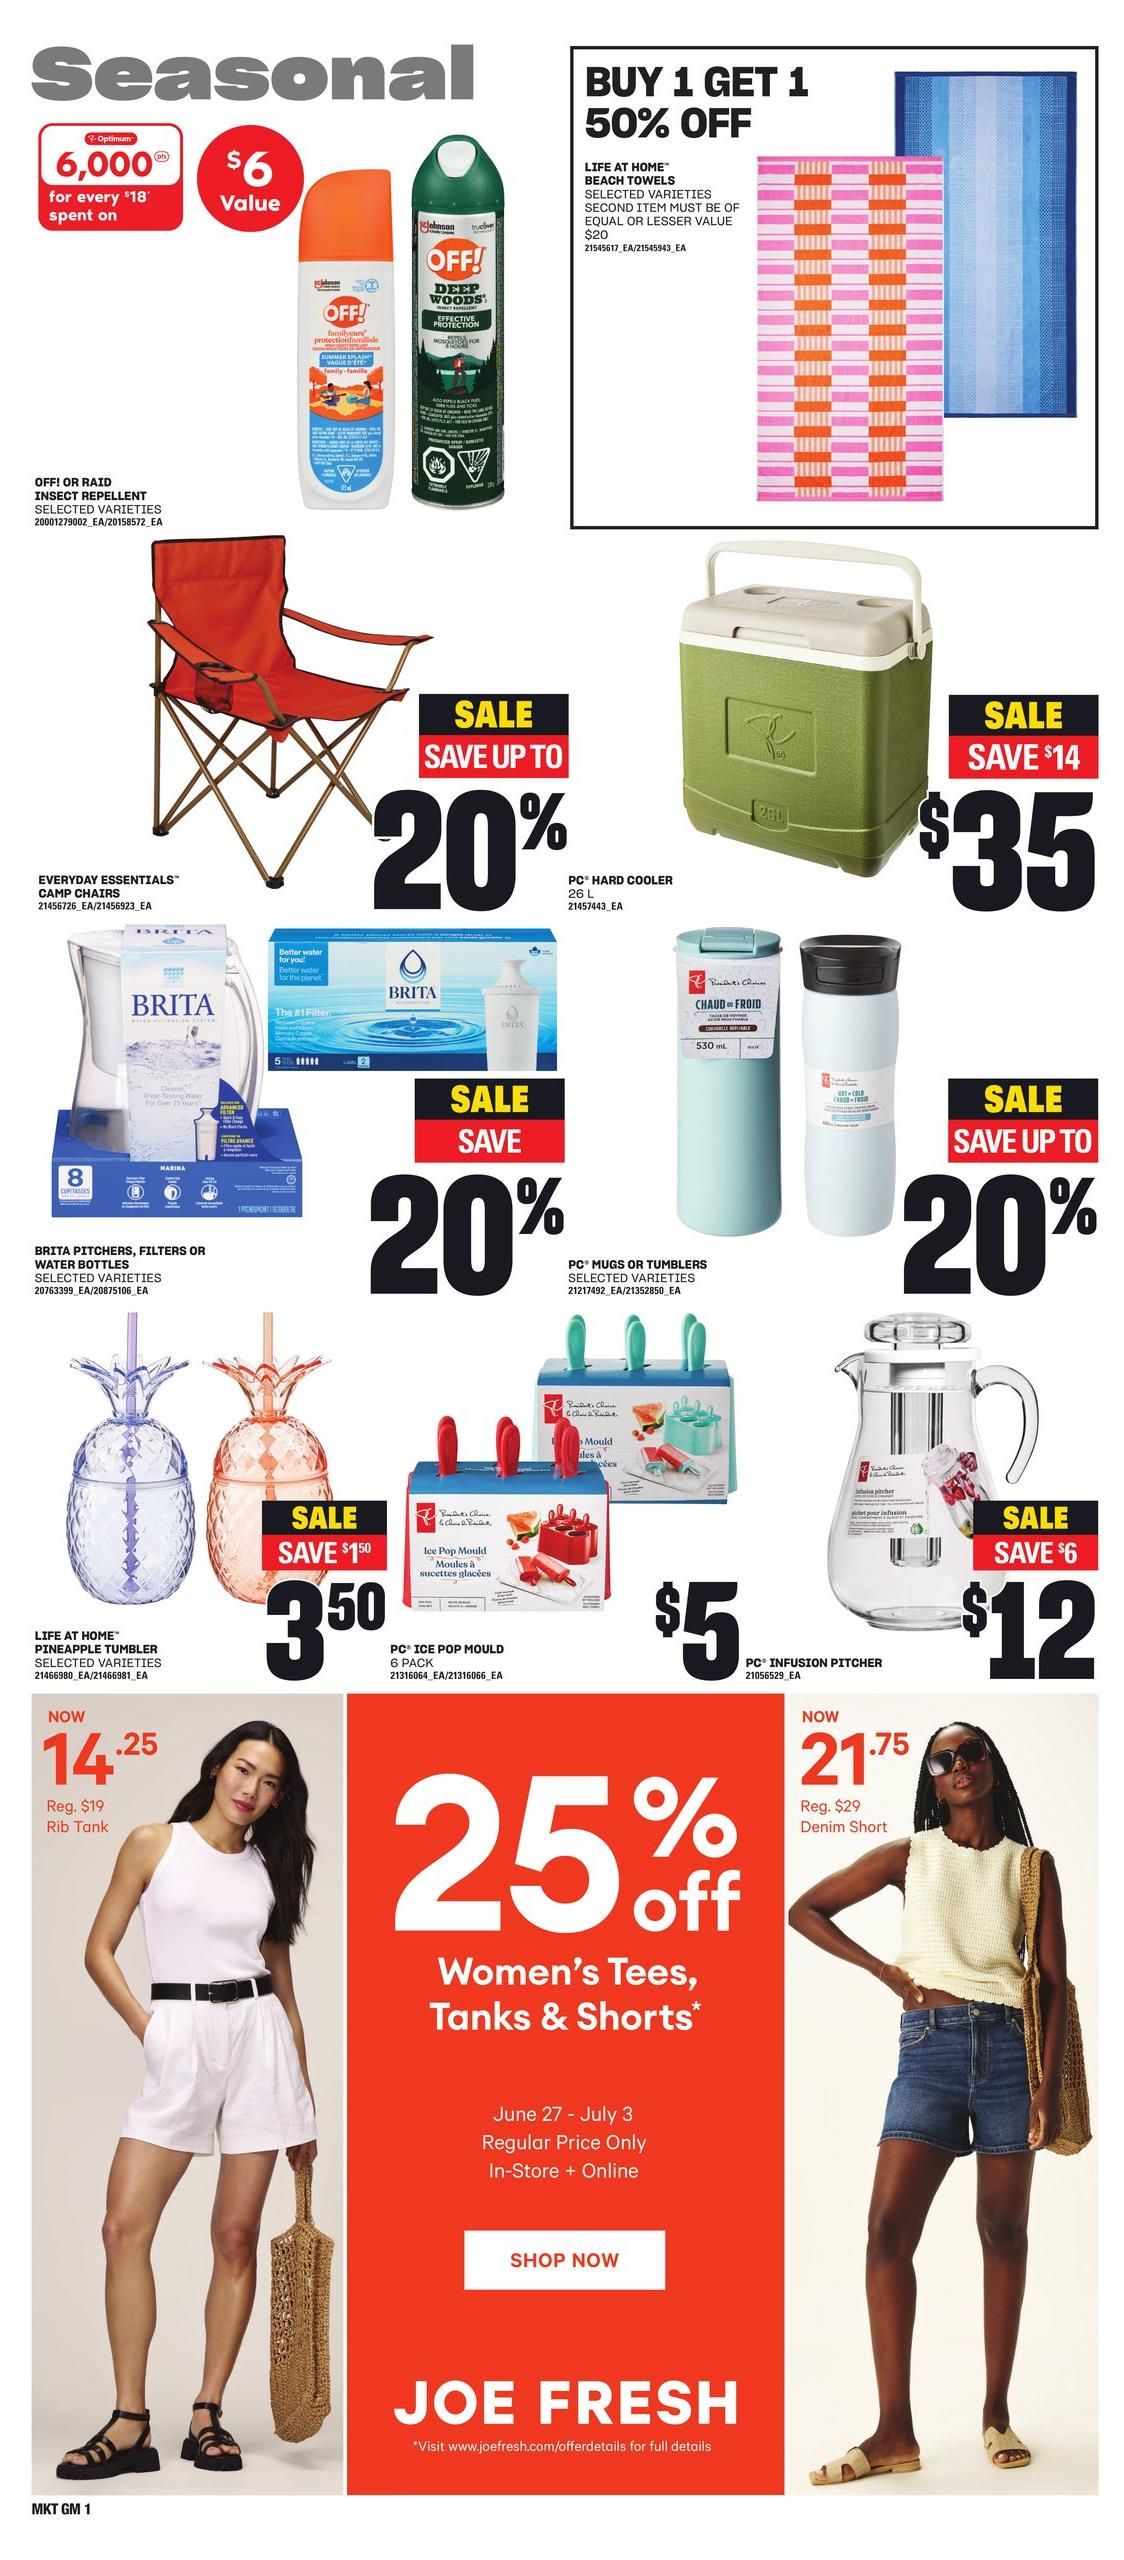 Zehrs - Weekly Flyer Specials - Page 15